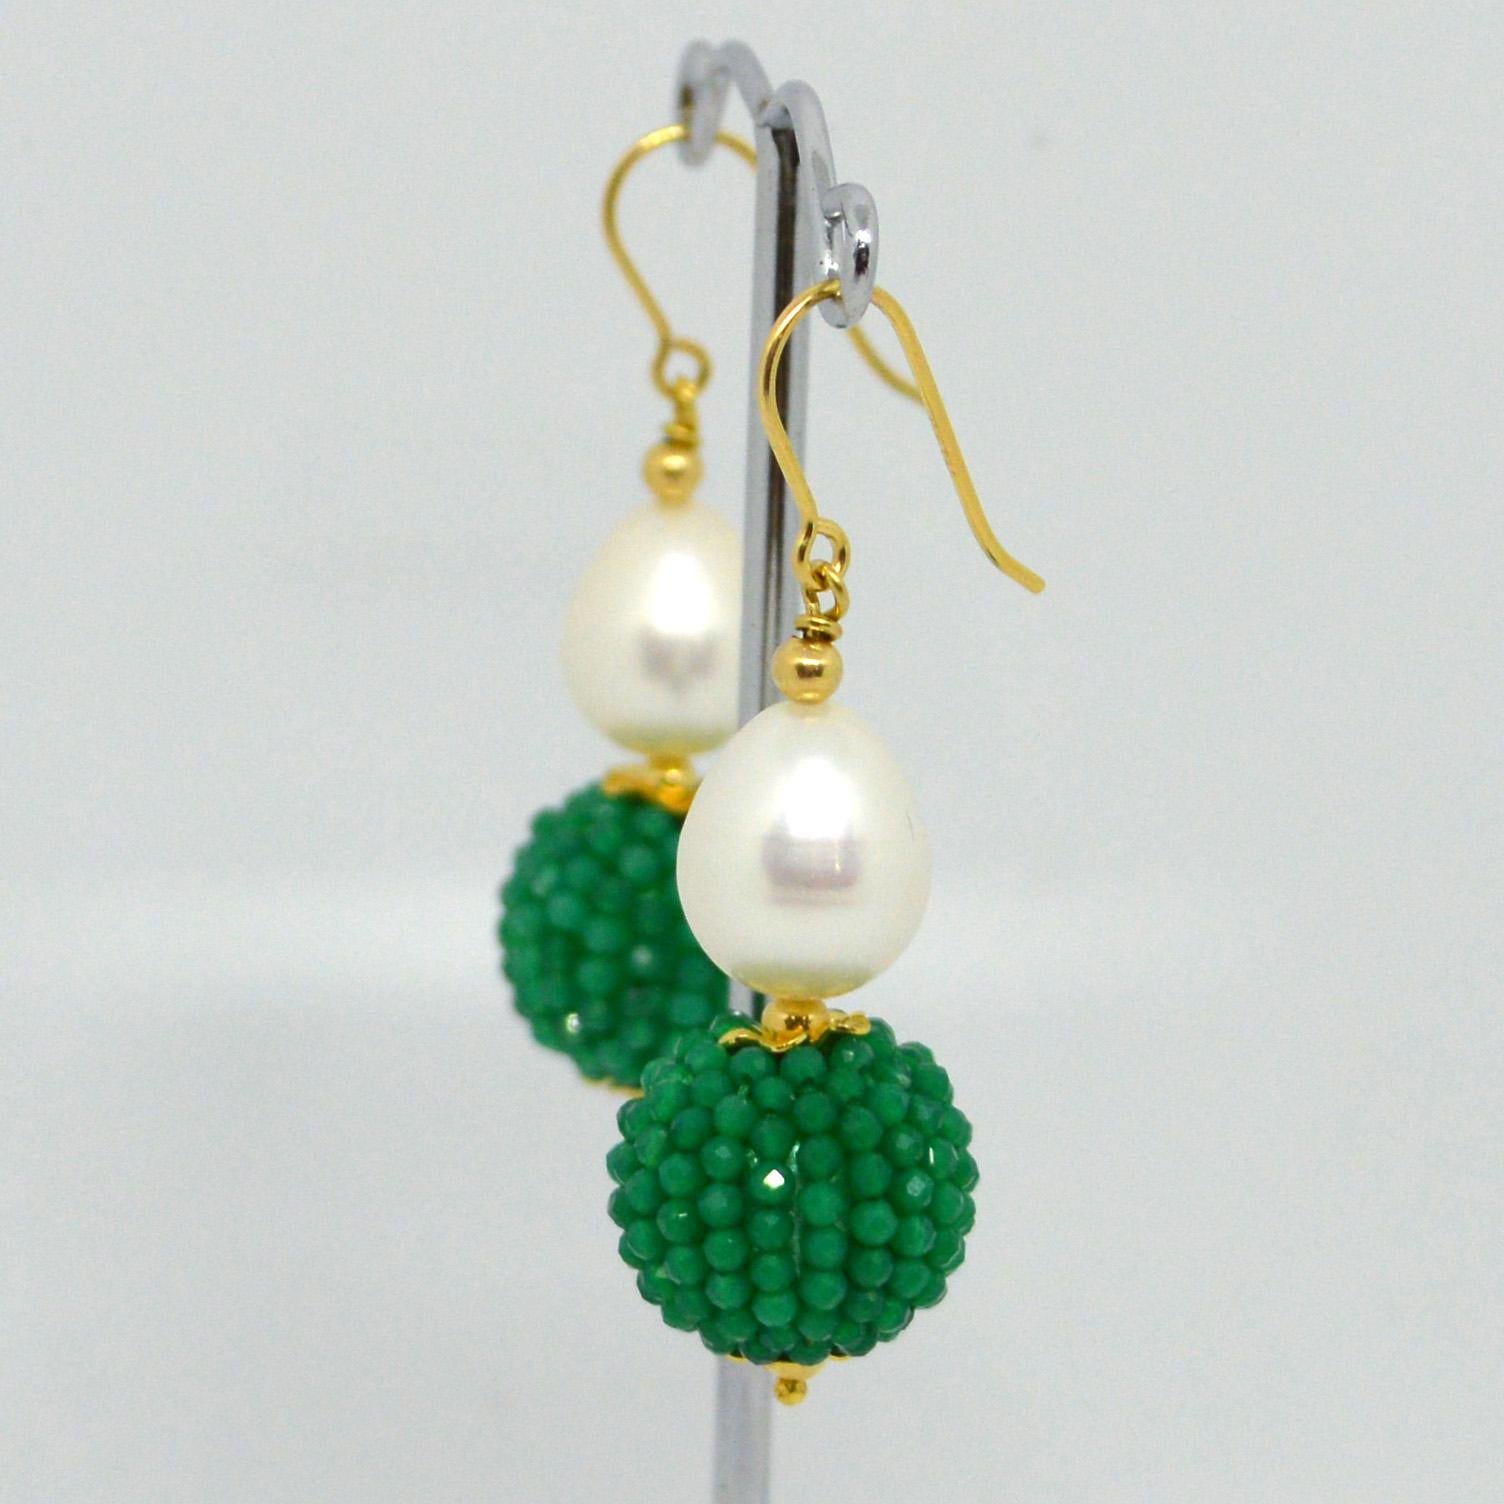 Natural Freshwater Pearl 15x10mm with a hand made beaded bead of natural Green Onyx mirco faceted beads 14k Gold Filled headpin and 3mm beads and Sheppard.

Total Earring length 45mm.
